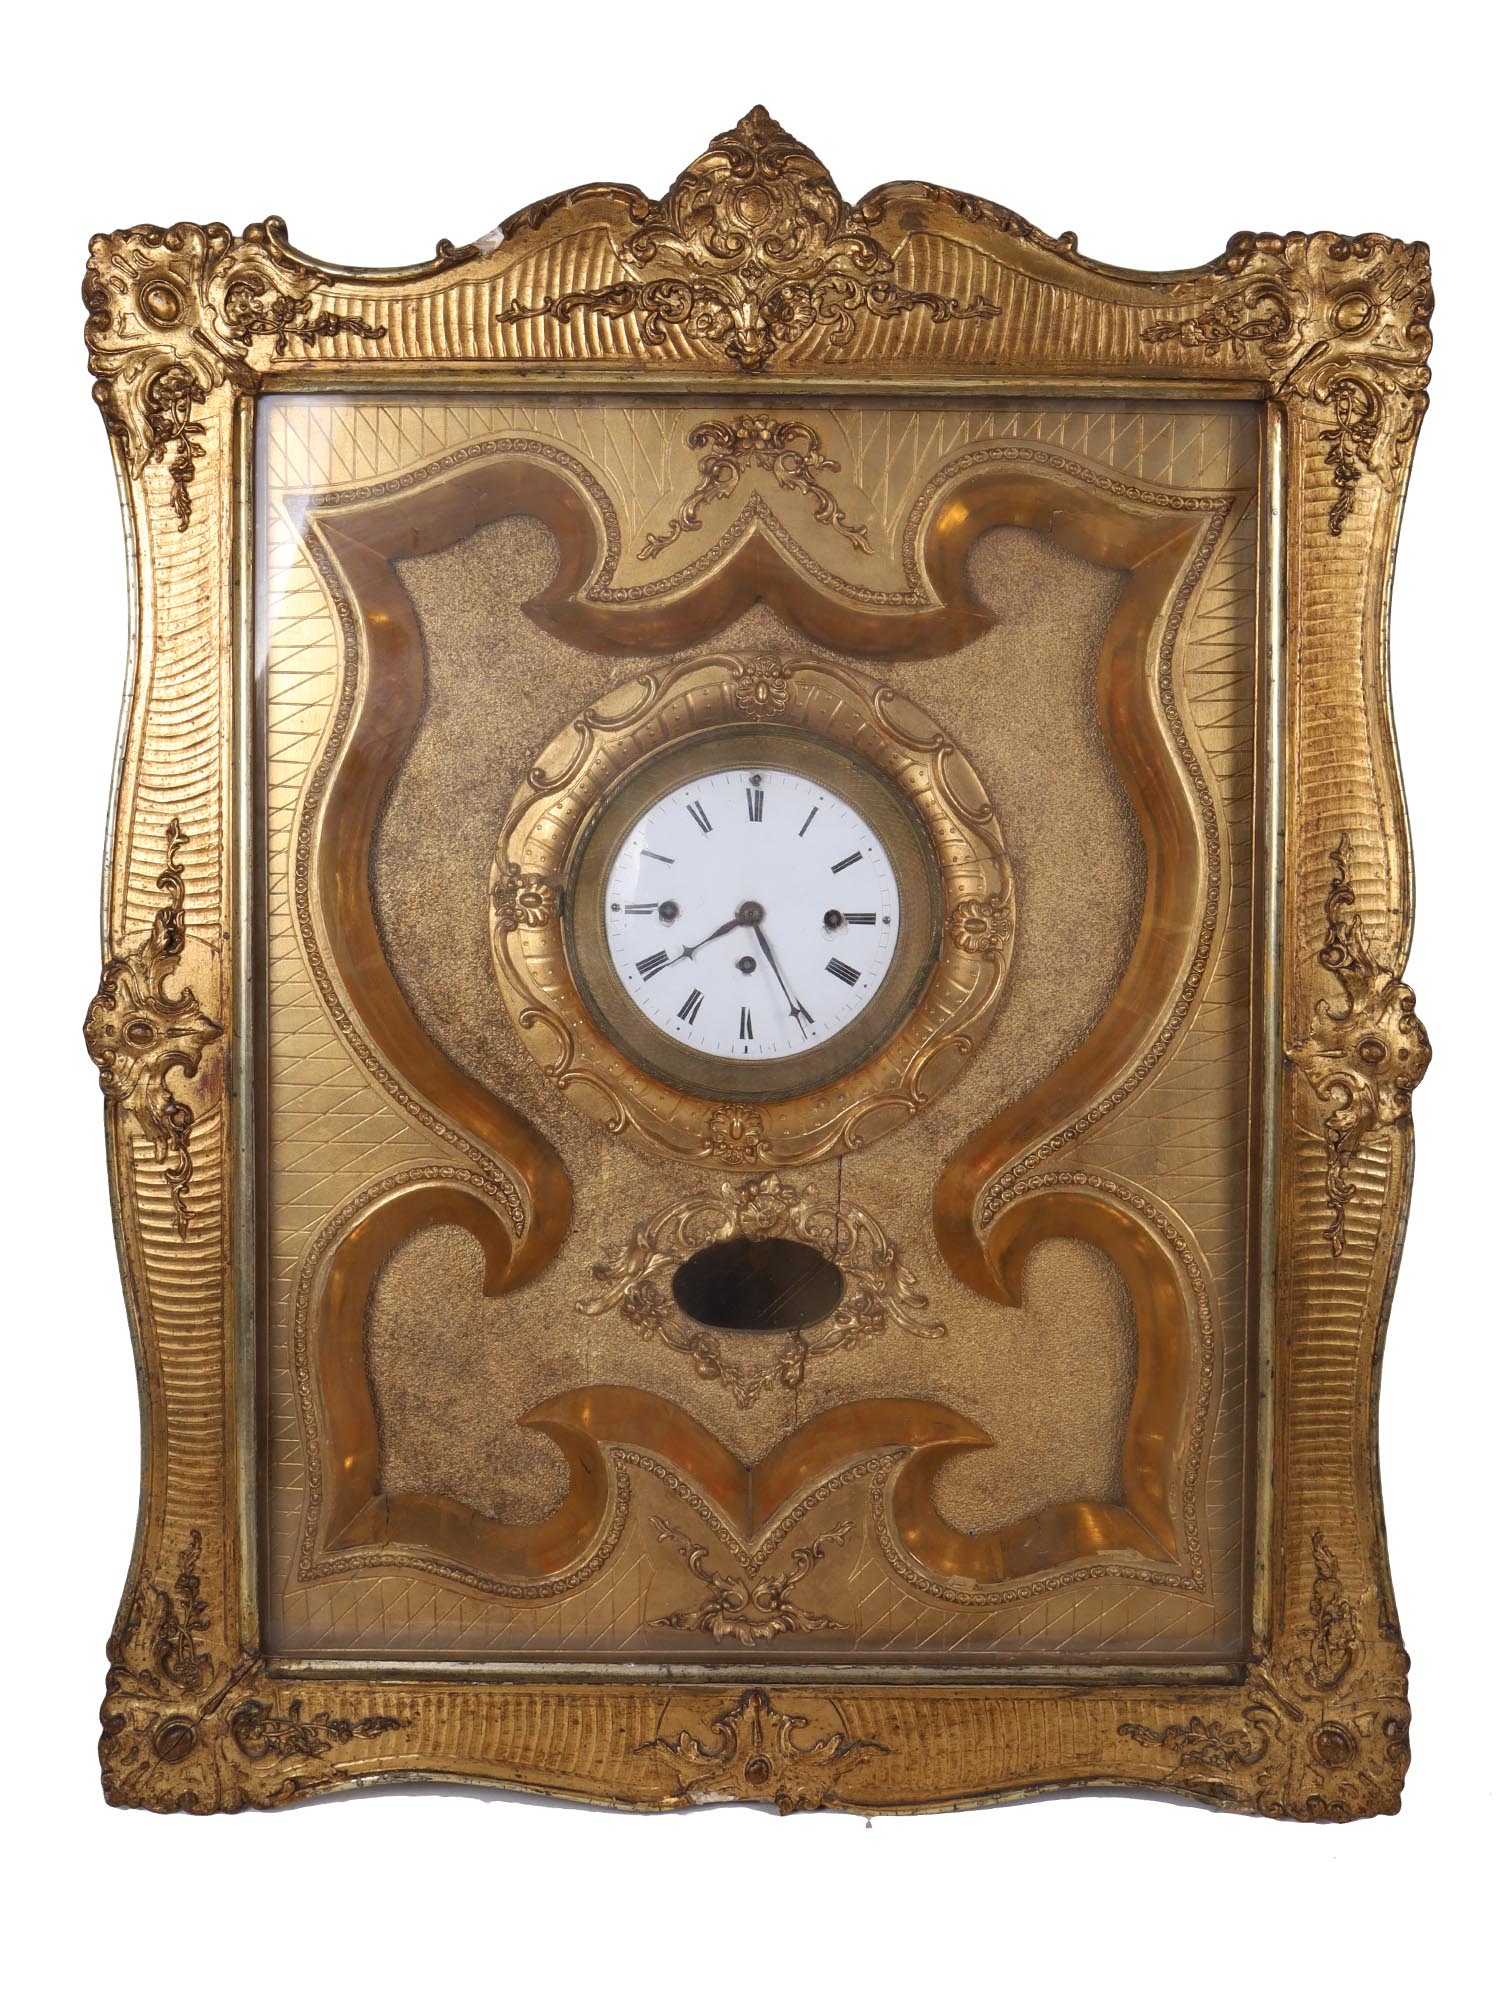 ANTIQUE CLOCK IN THE GILT WOOD PICTURE FRAMED PIC-0